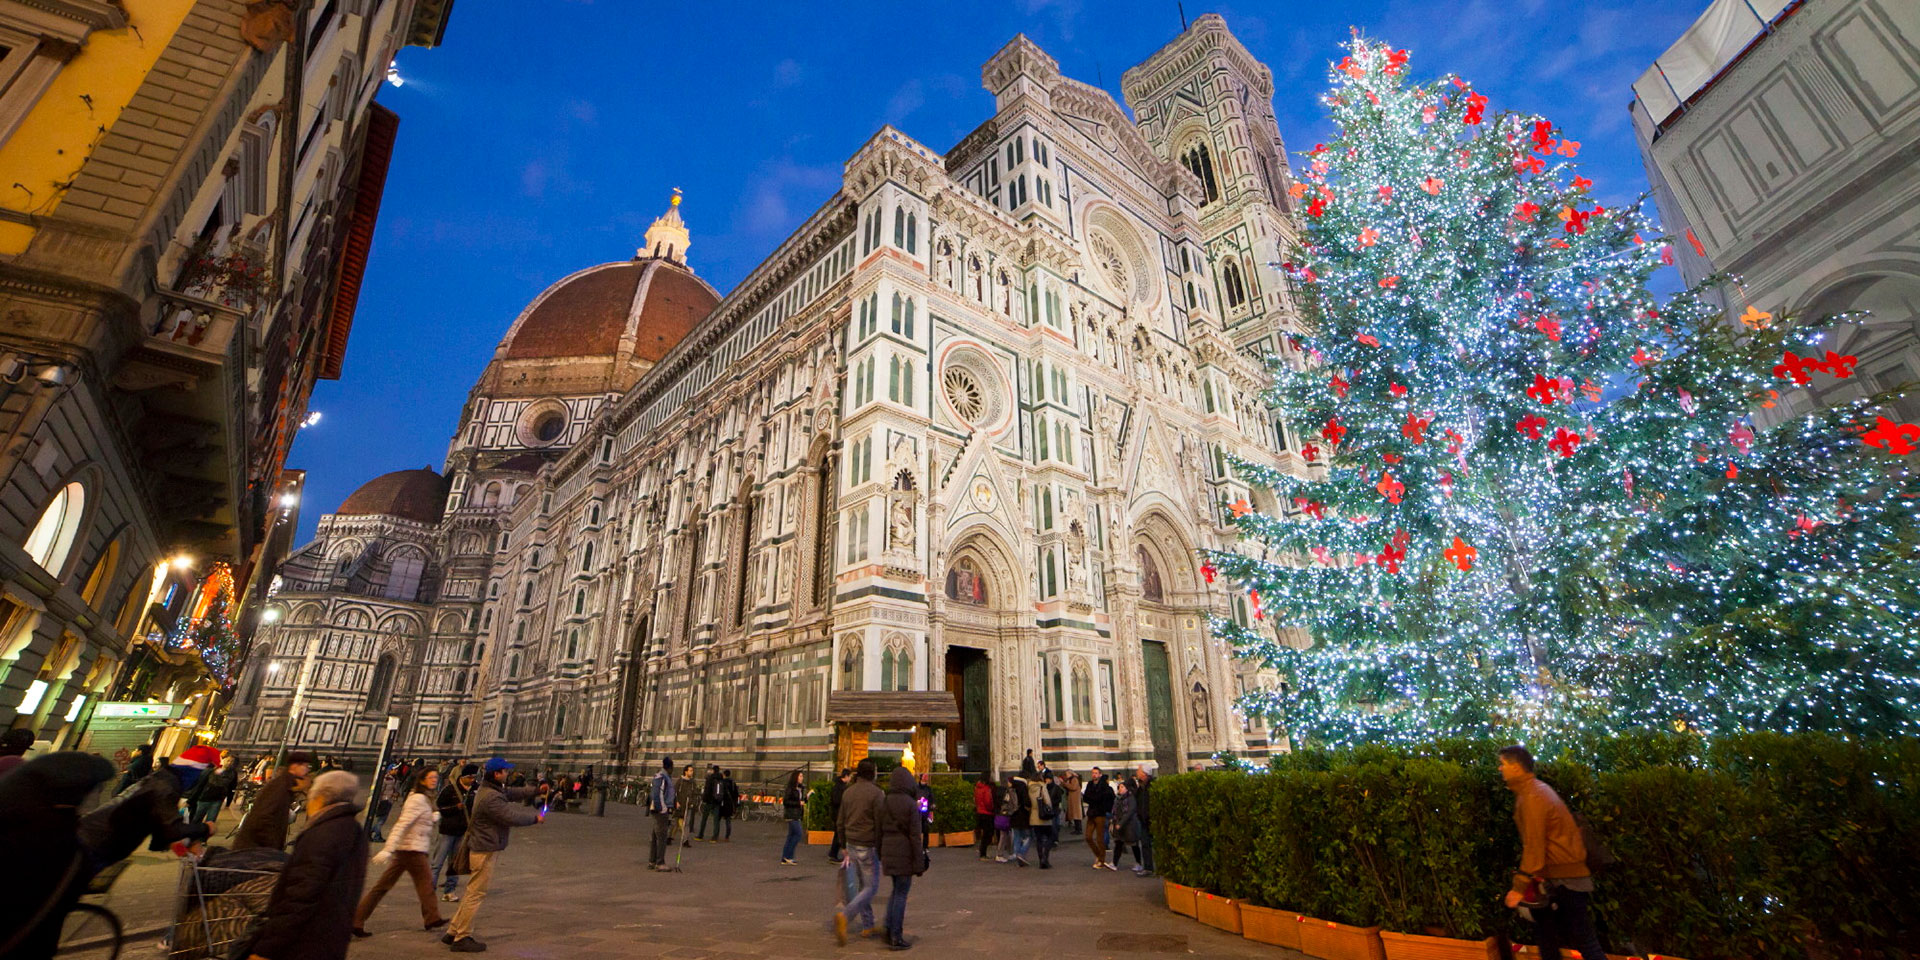 christmas in florence